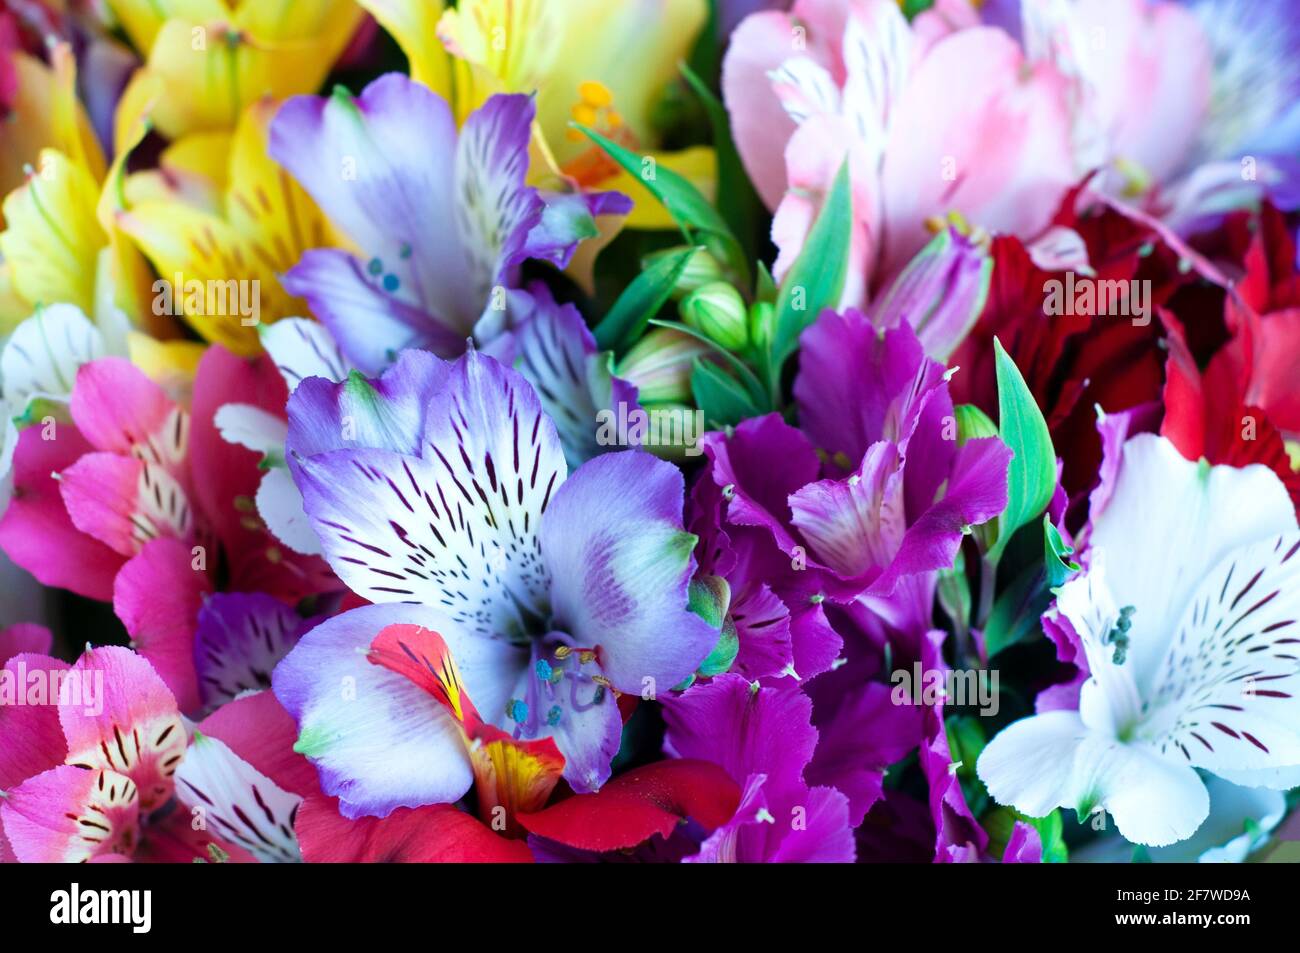 Beautiful floral alstroemeria background. Alstroemeria flowers are colorful. Purple, red, yellow, pink Peruvian lilies. Stock Photo